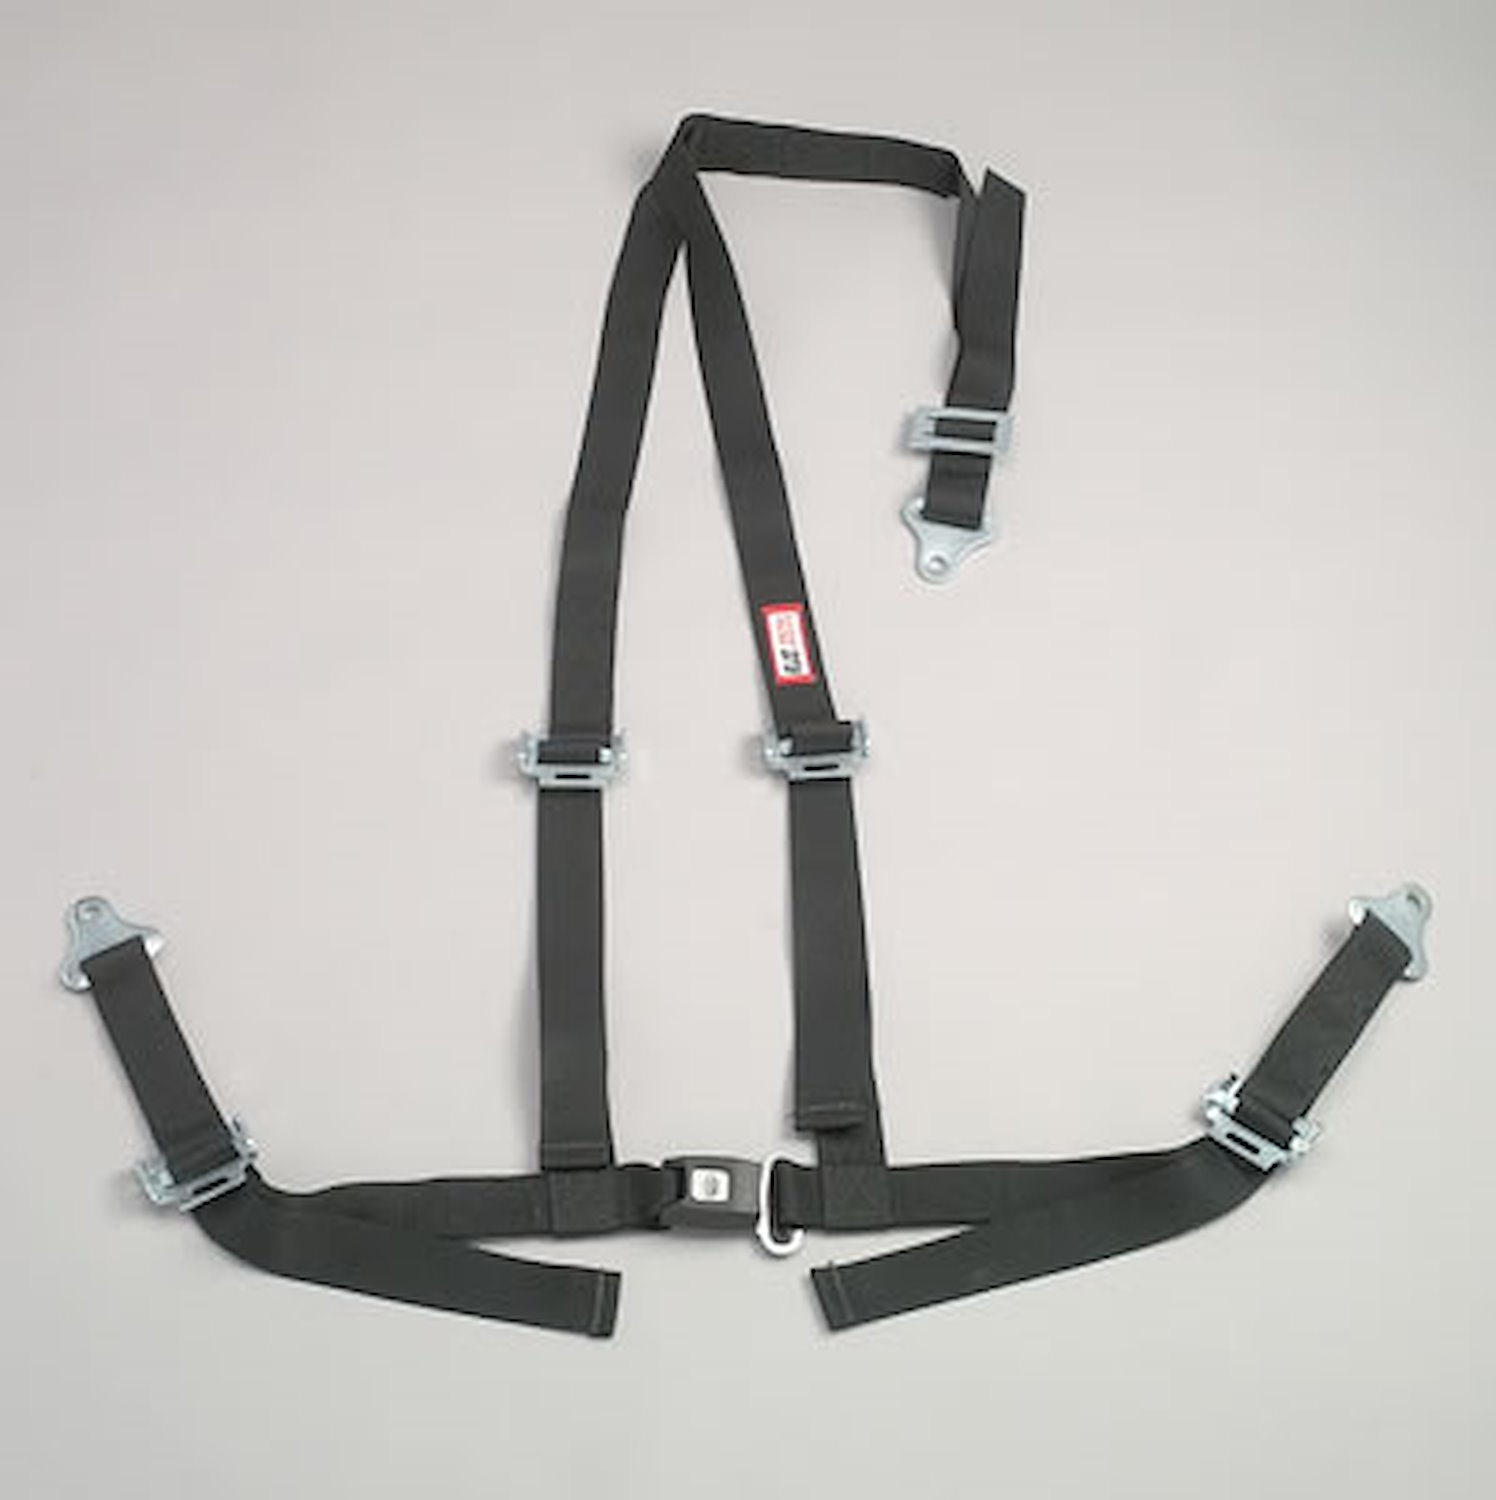 NON-SFI B&T HARNESS 2 PULL DOWN Lap Belt 2 S. H. V ROLL BAR Mount ALL WRAP ENDS w/STERNUM STRAP OD GREEN